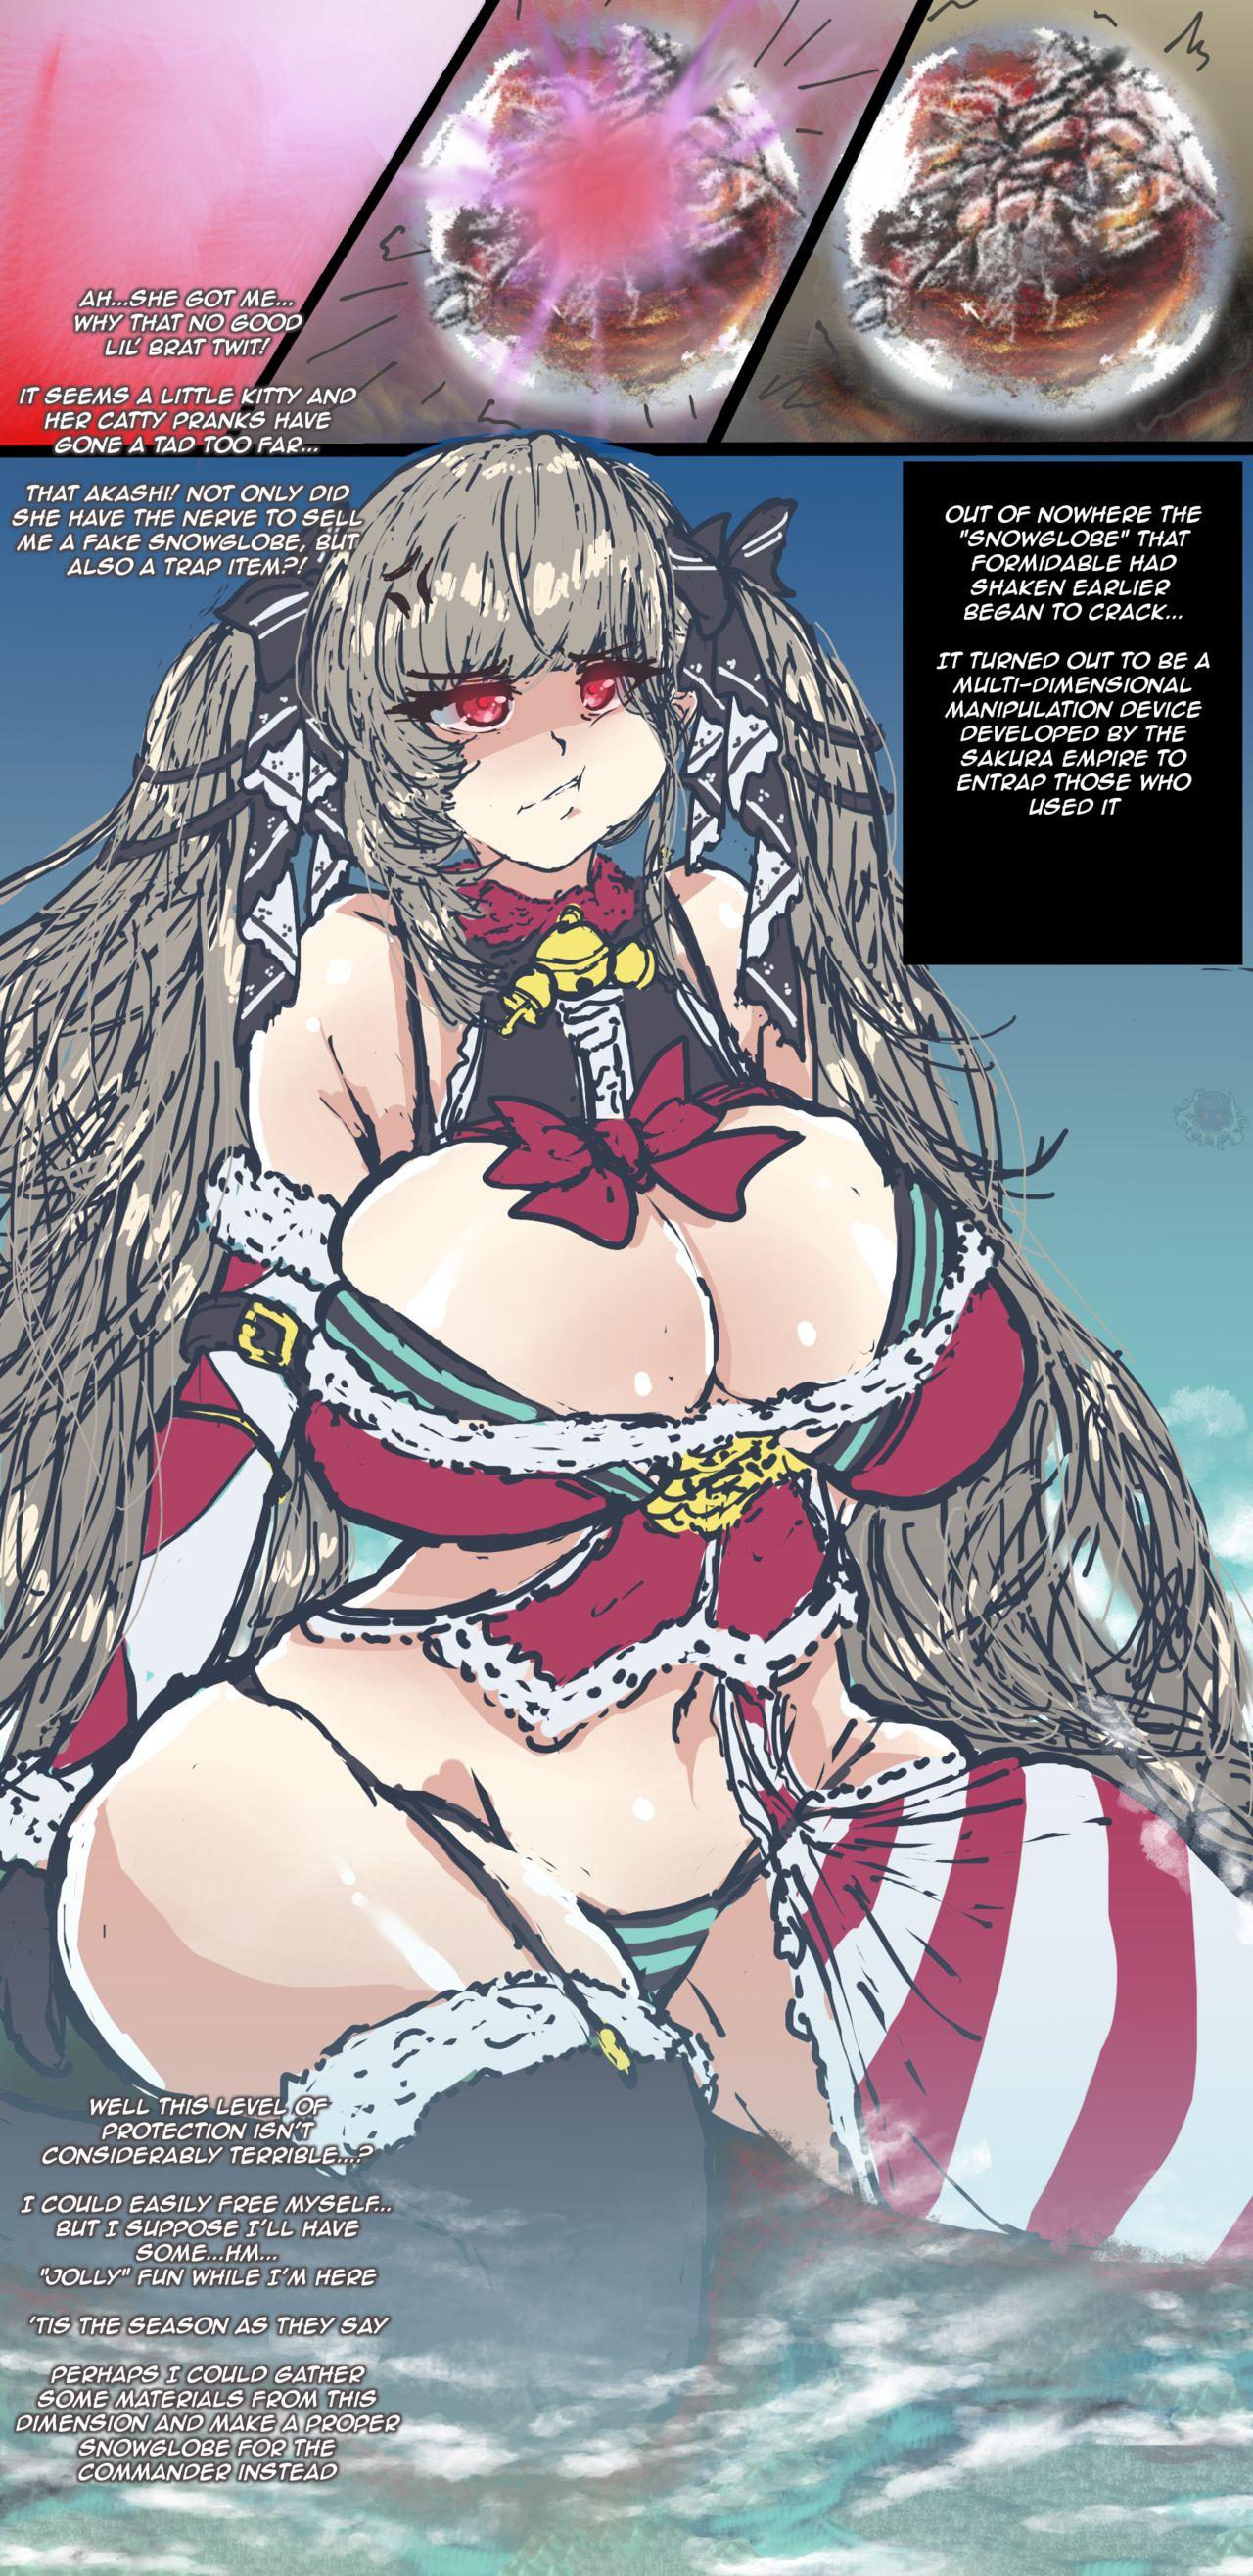 Gay Pornstar Merry Formidable Christmas - Azur lane Ass Licking - Page 4